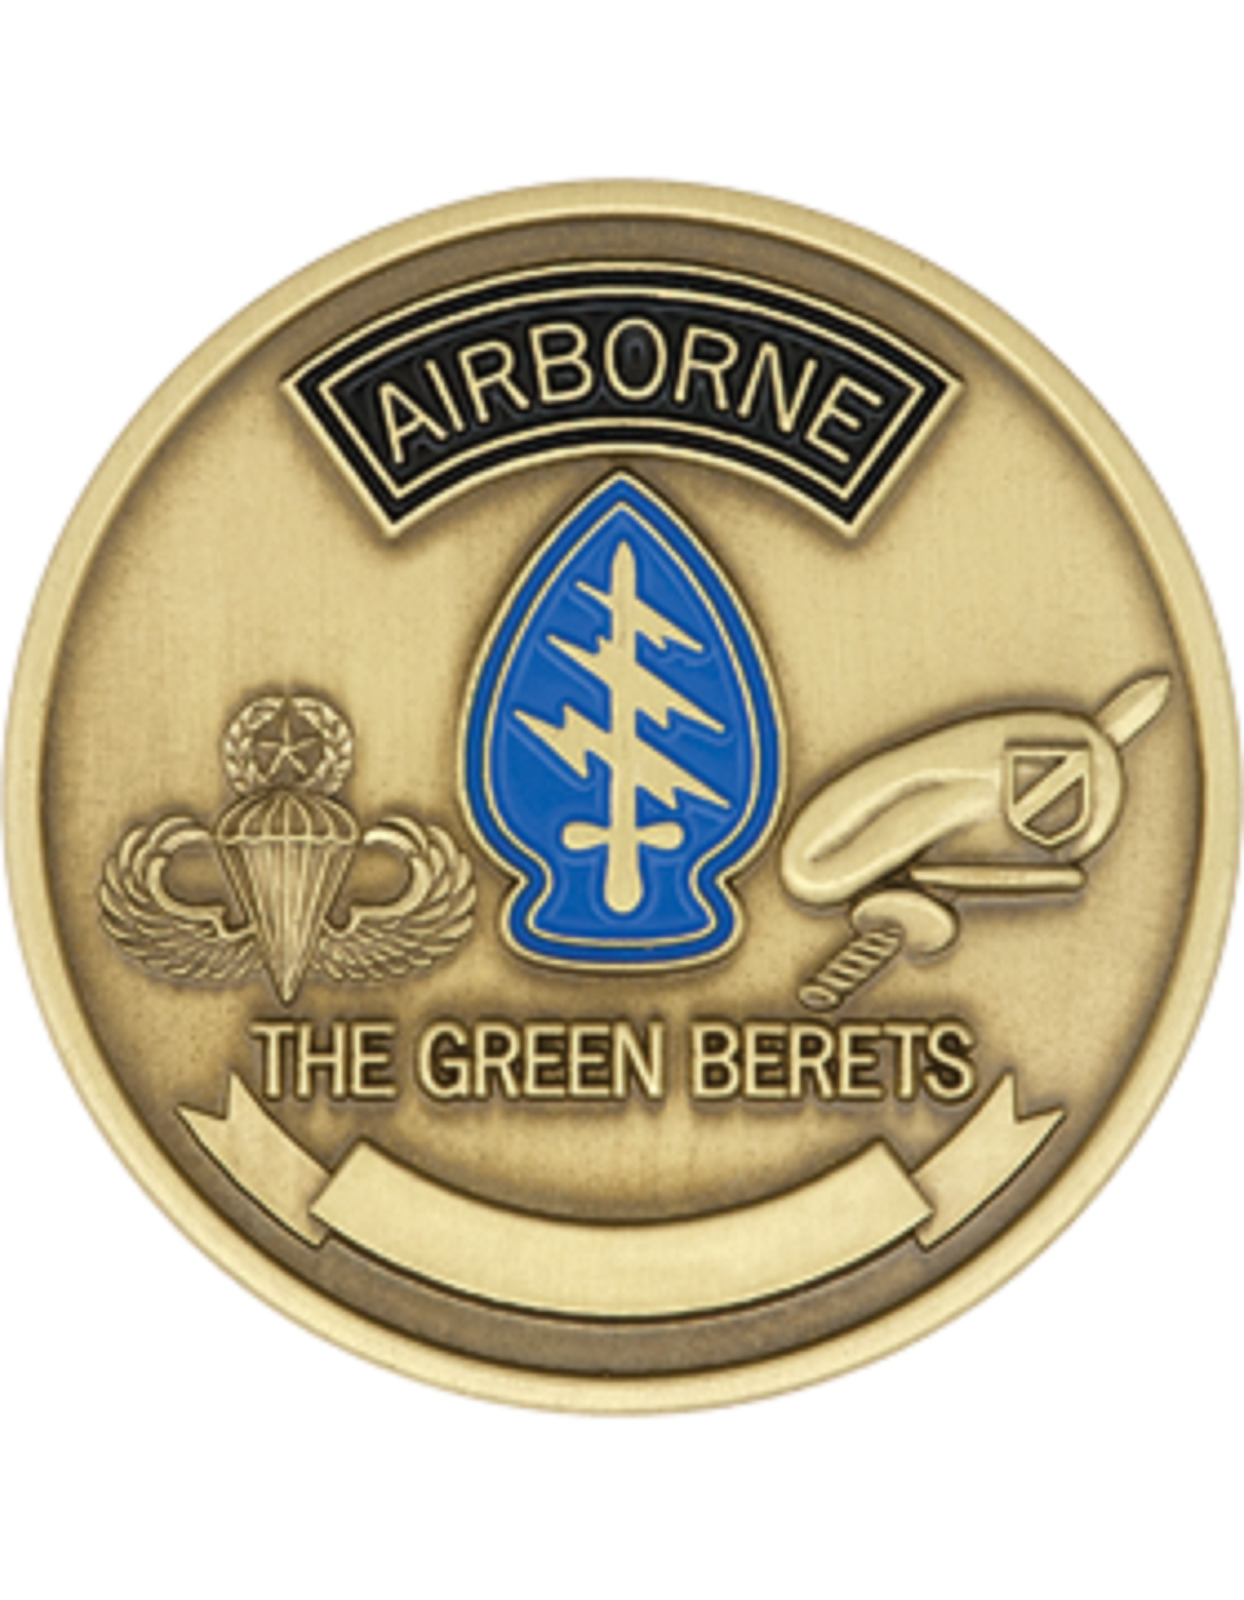 ARMY 20TH SPECIAL FORCES THE GREEN BERETS  CHALLENGE COIN